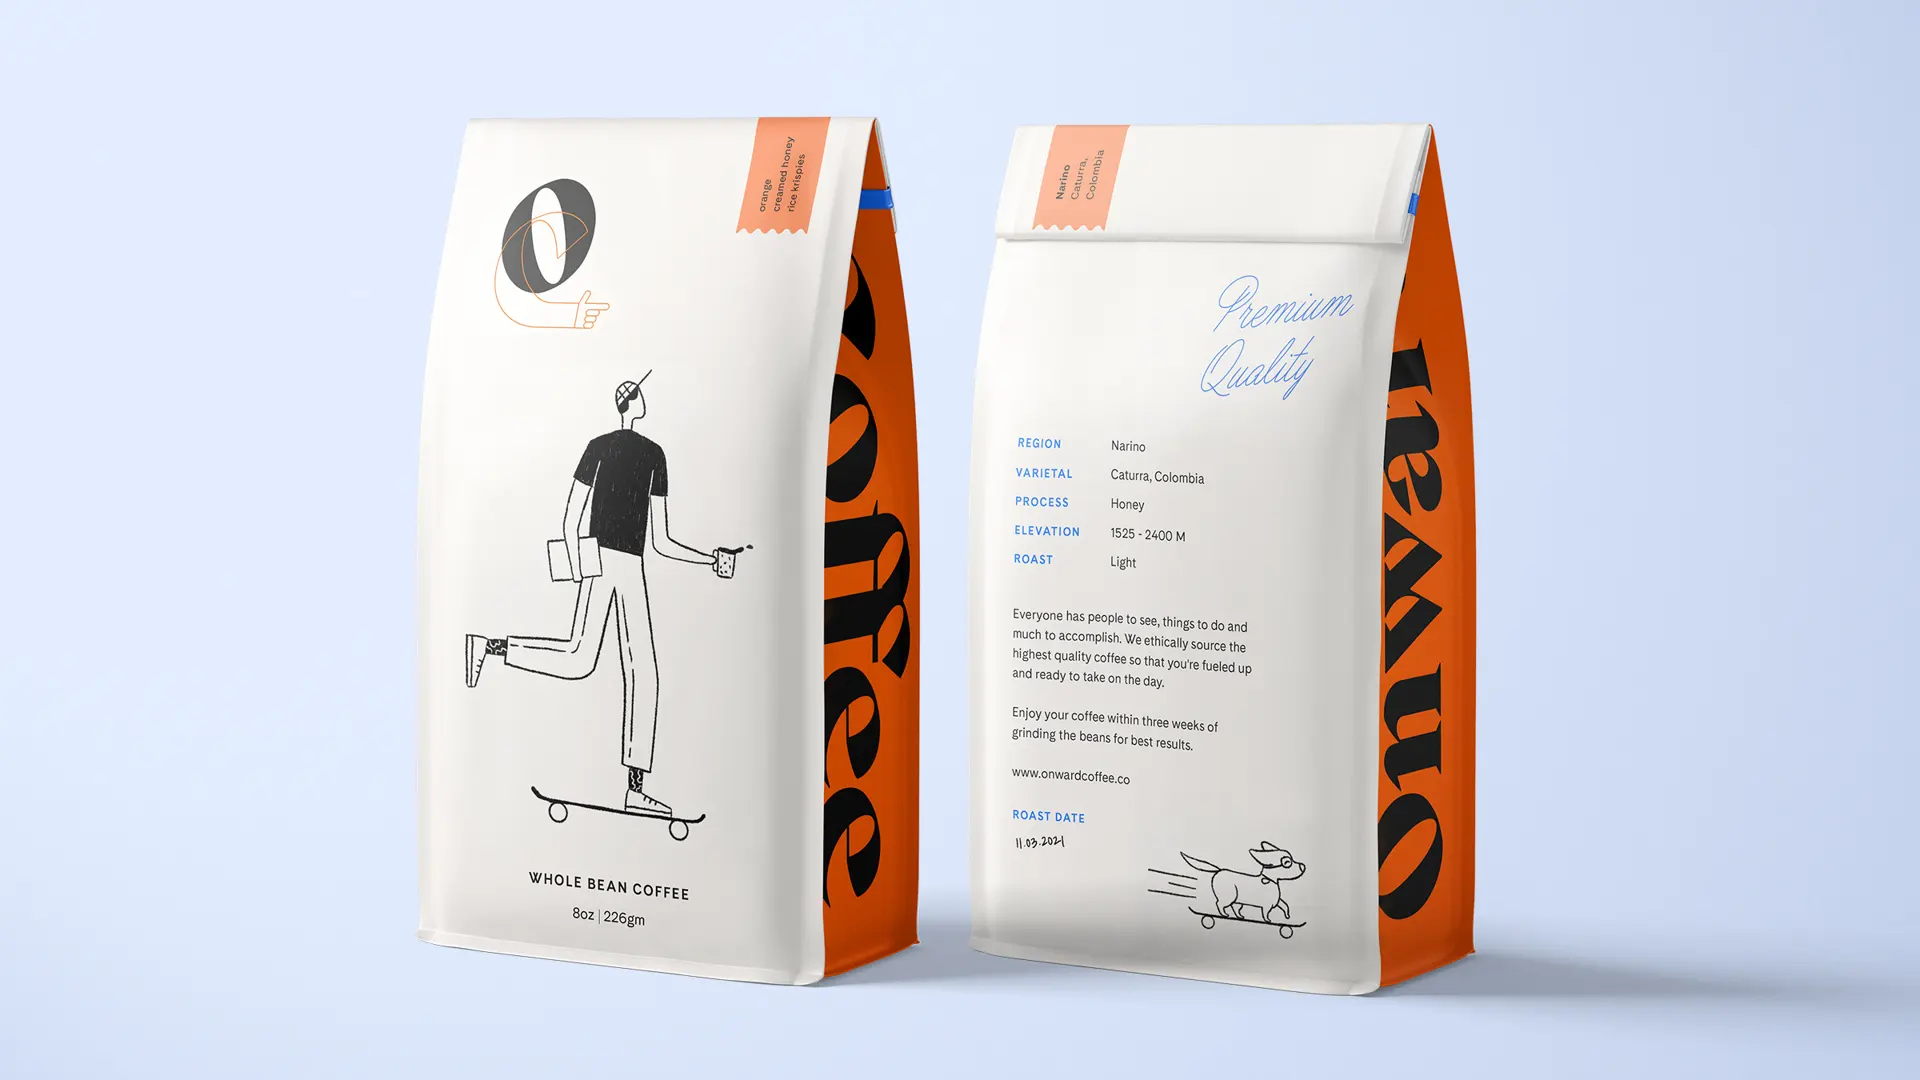 Old Spike Specializes in Coffee & Giving Back  Dieline - Design, Branding  & Packaging Inspiration